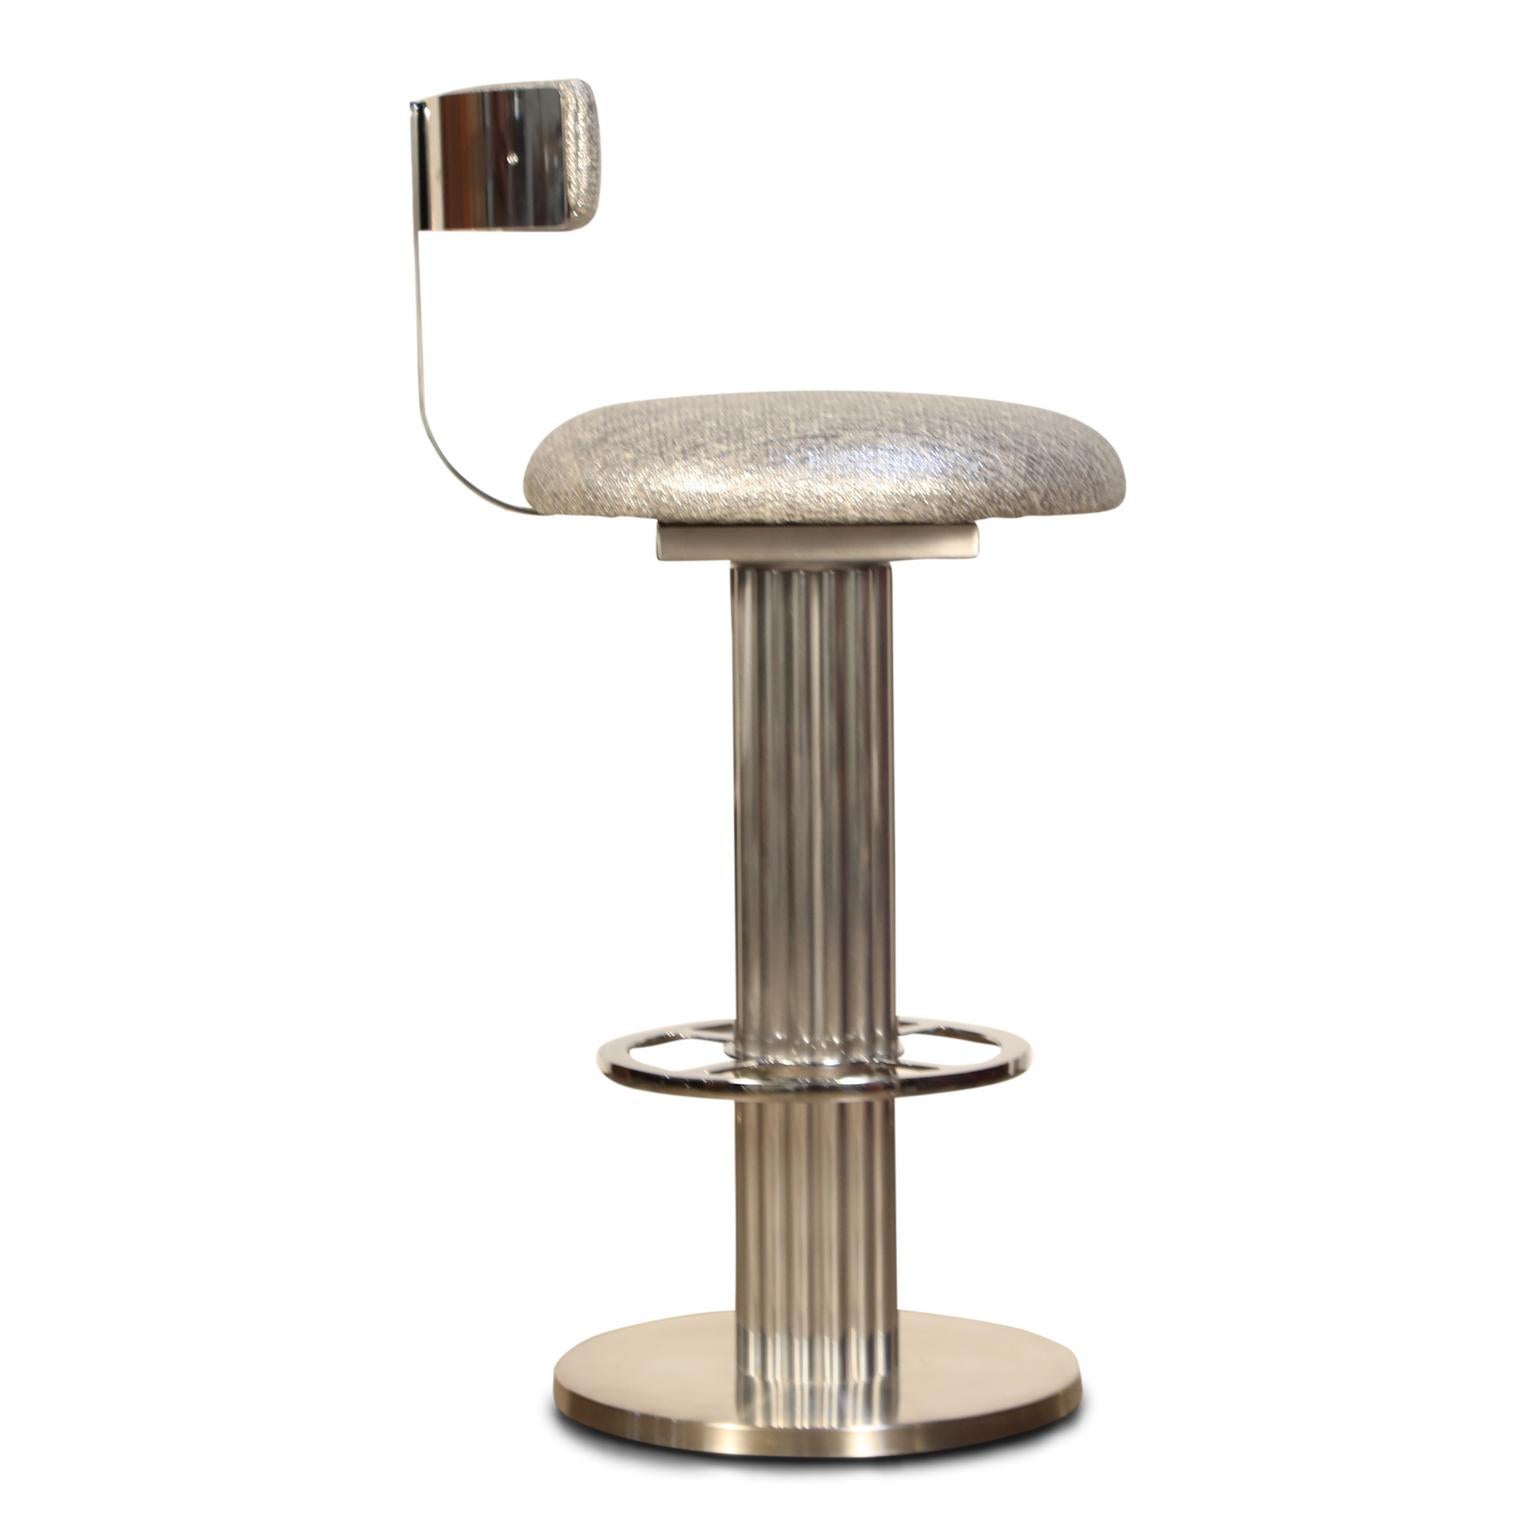 American Pair of Memory Swivel Polished Aluminum Barstools by Designs for Leisure, 1980s